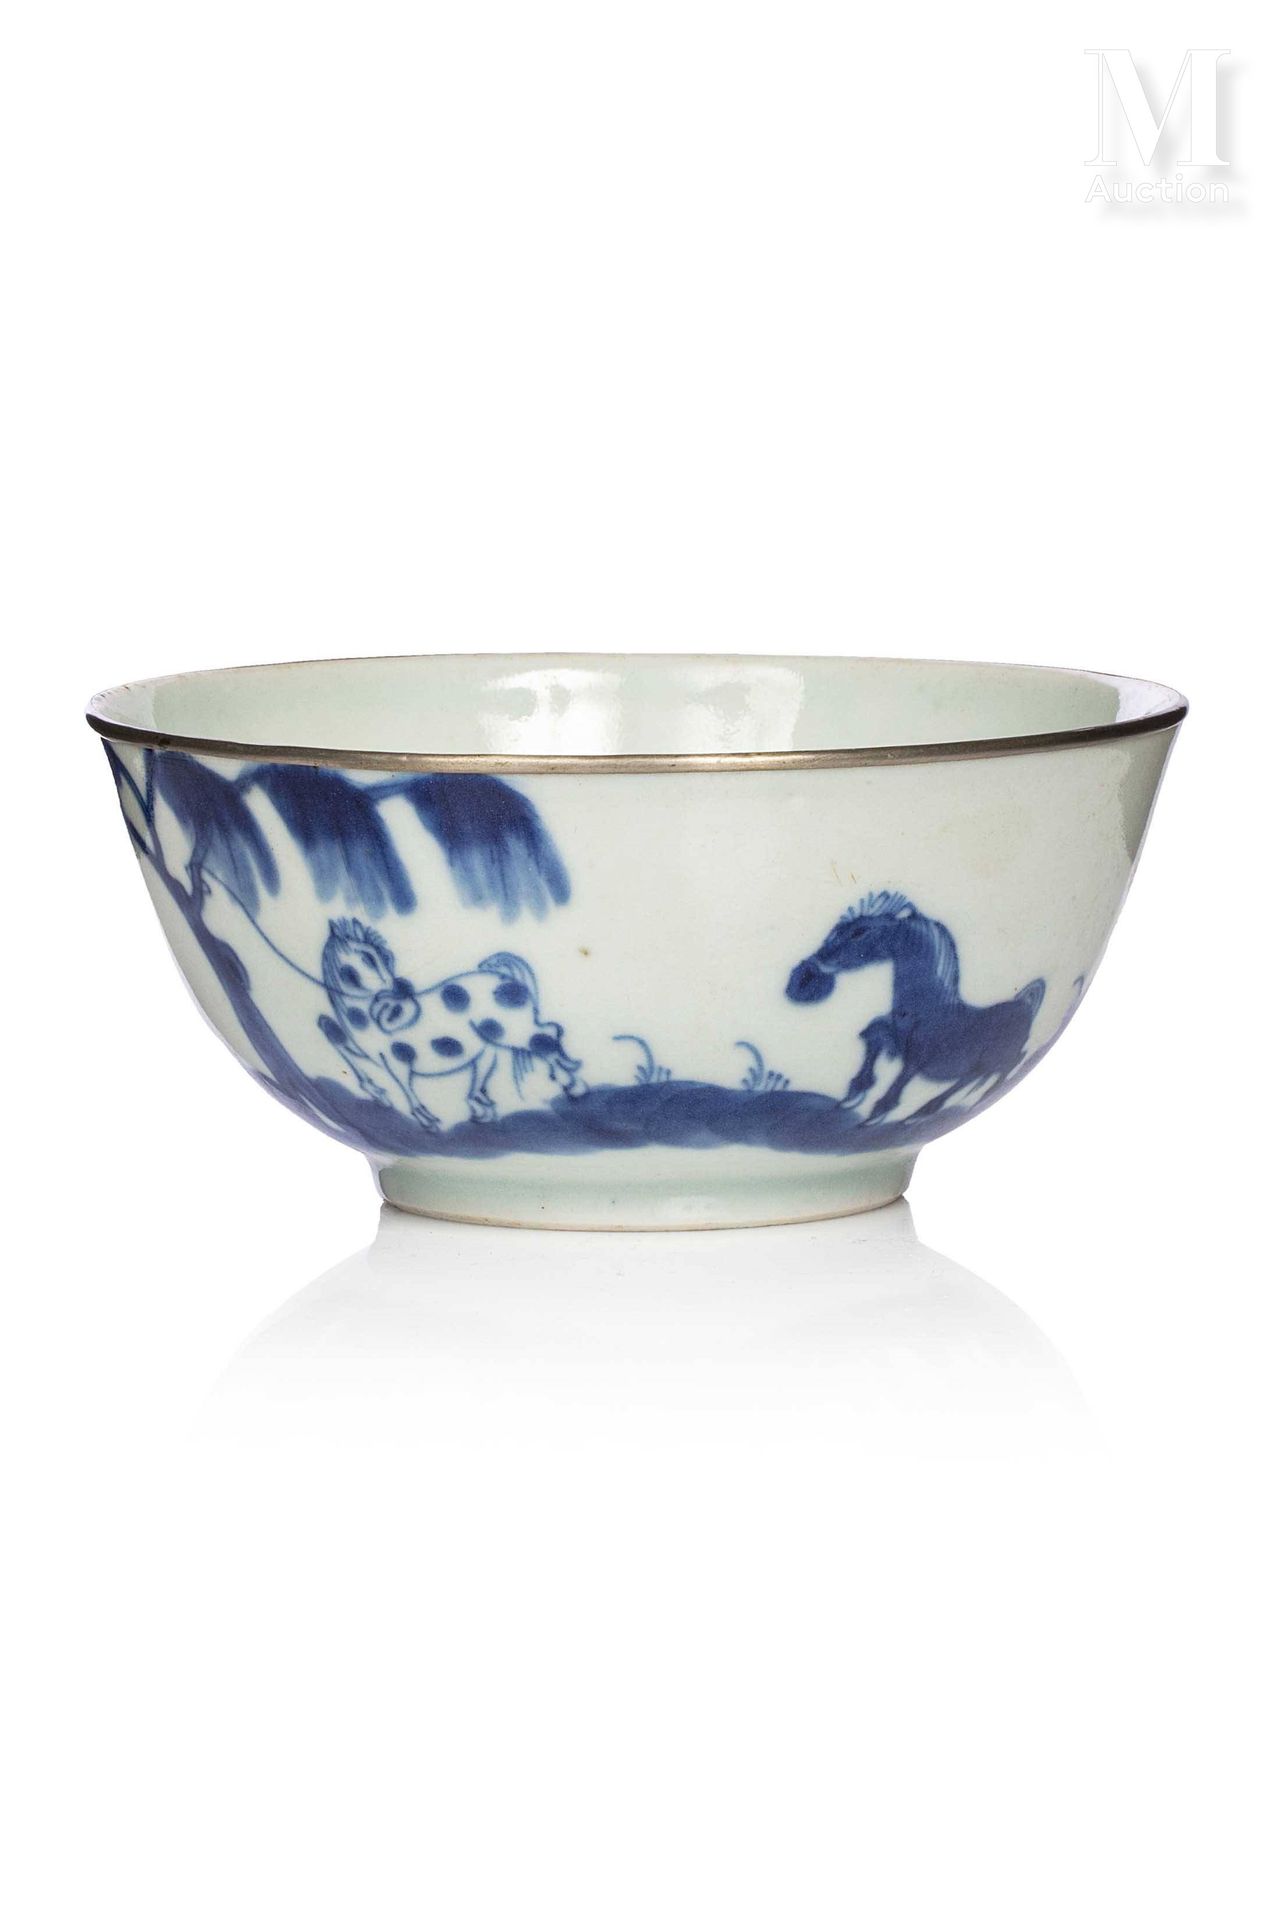 VIETNAM, XIXe siècle, Bol en porcelaine decorated in cobalt blue with horses and&hellip;